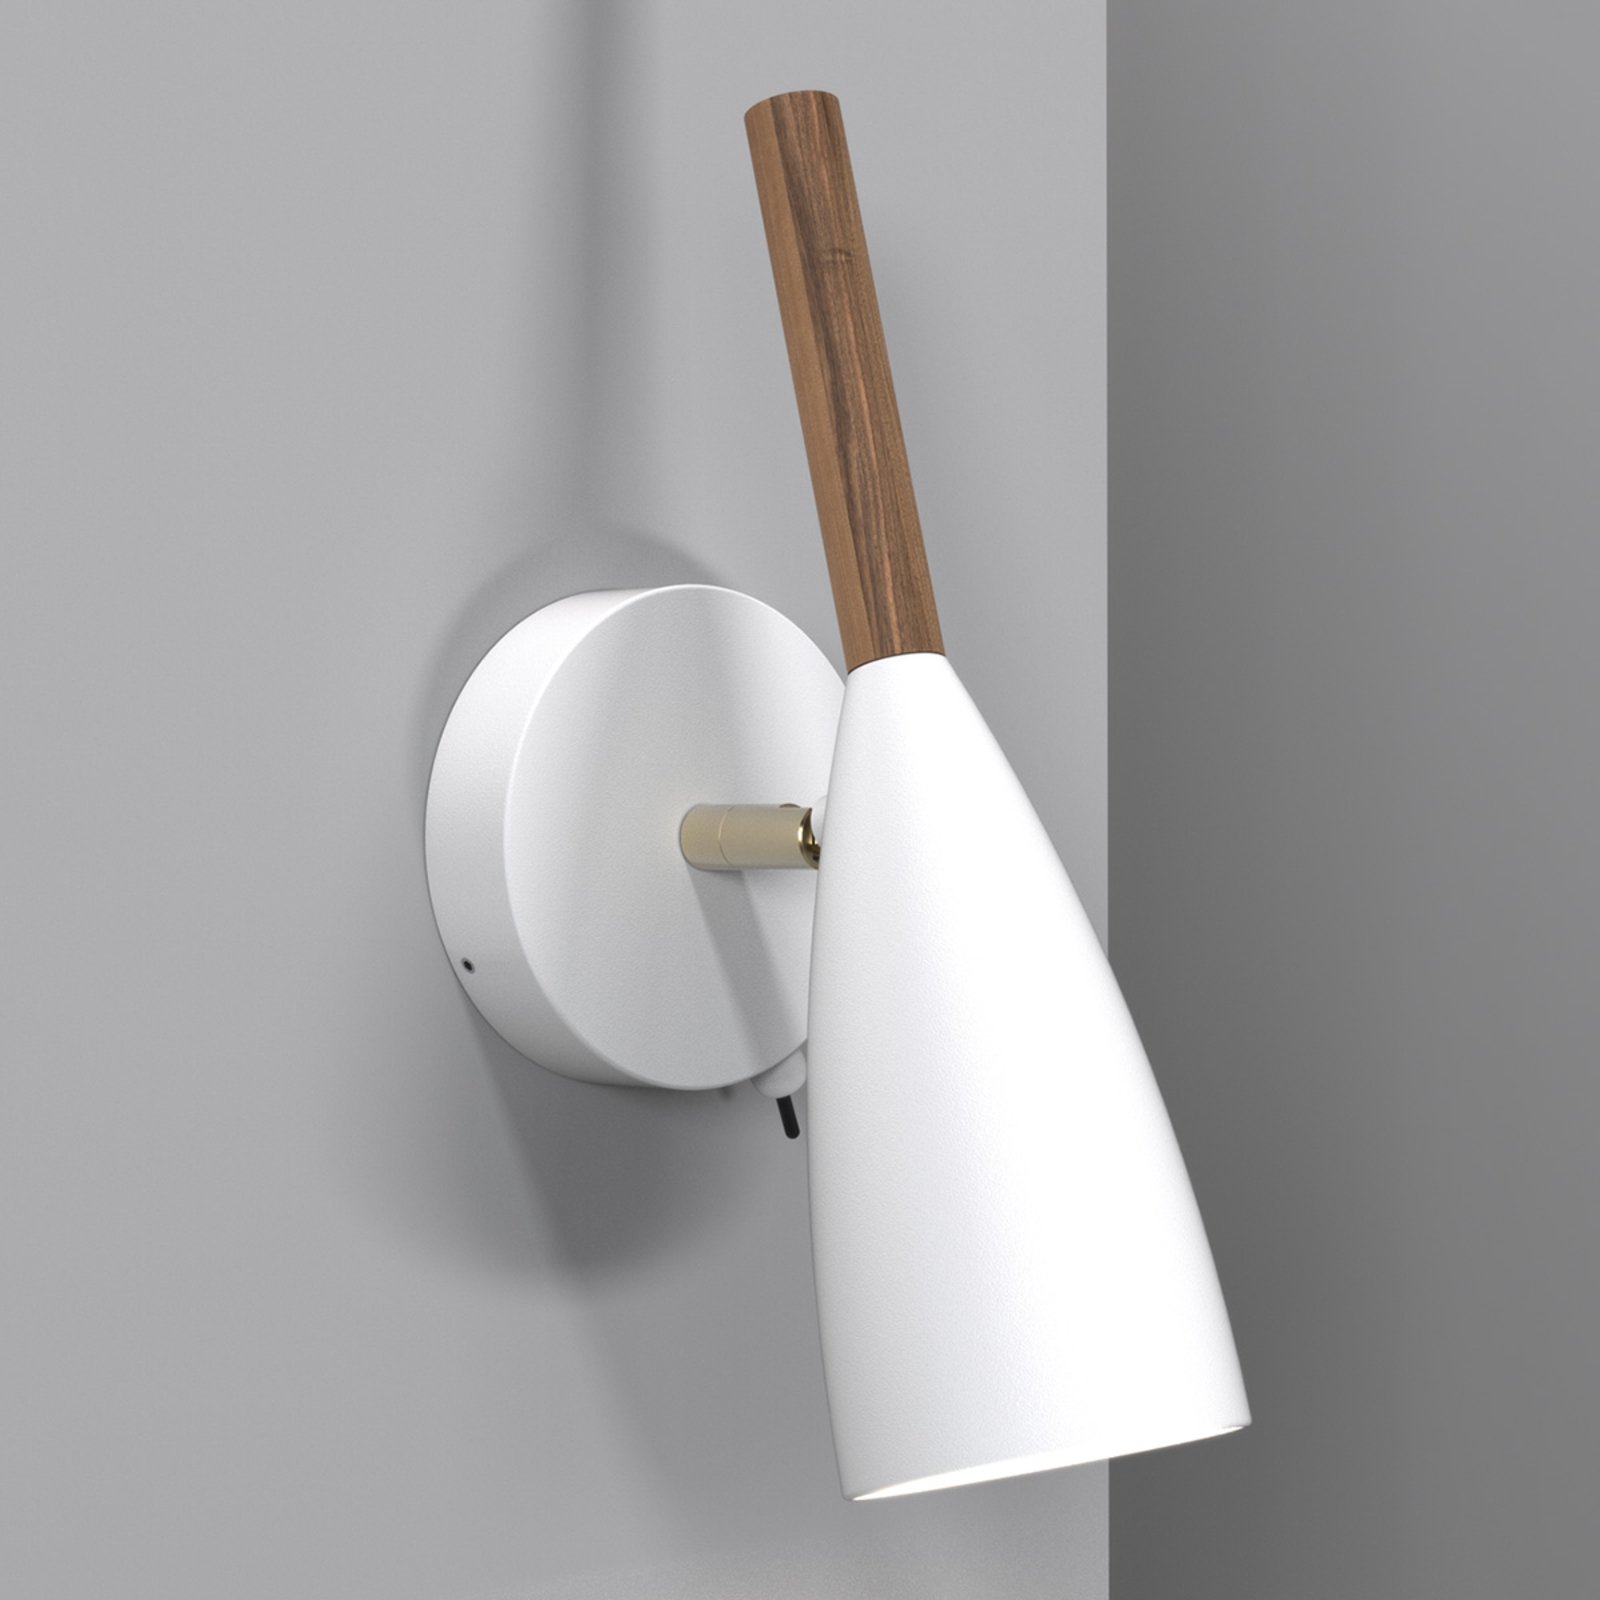 Pure wall light in white with wooden element